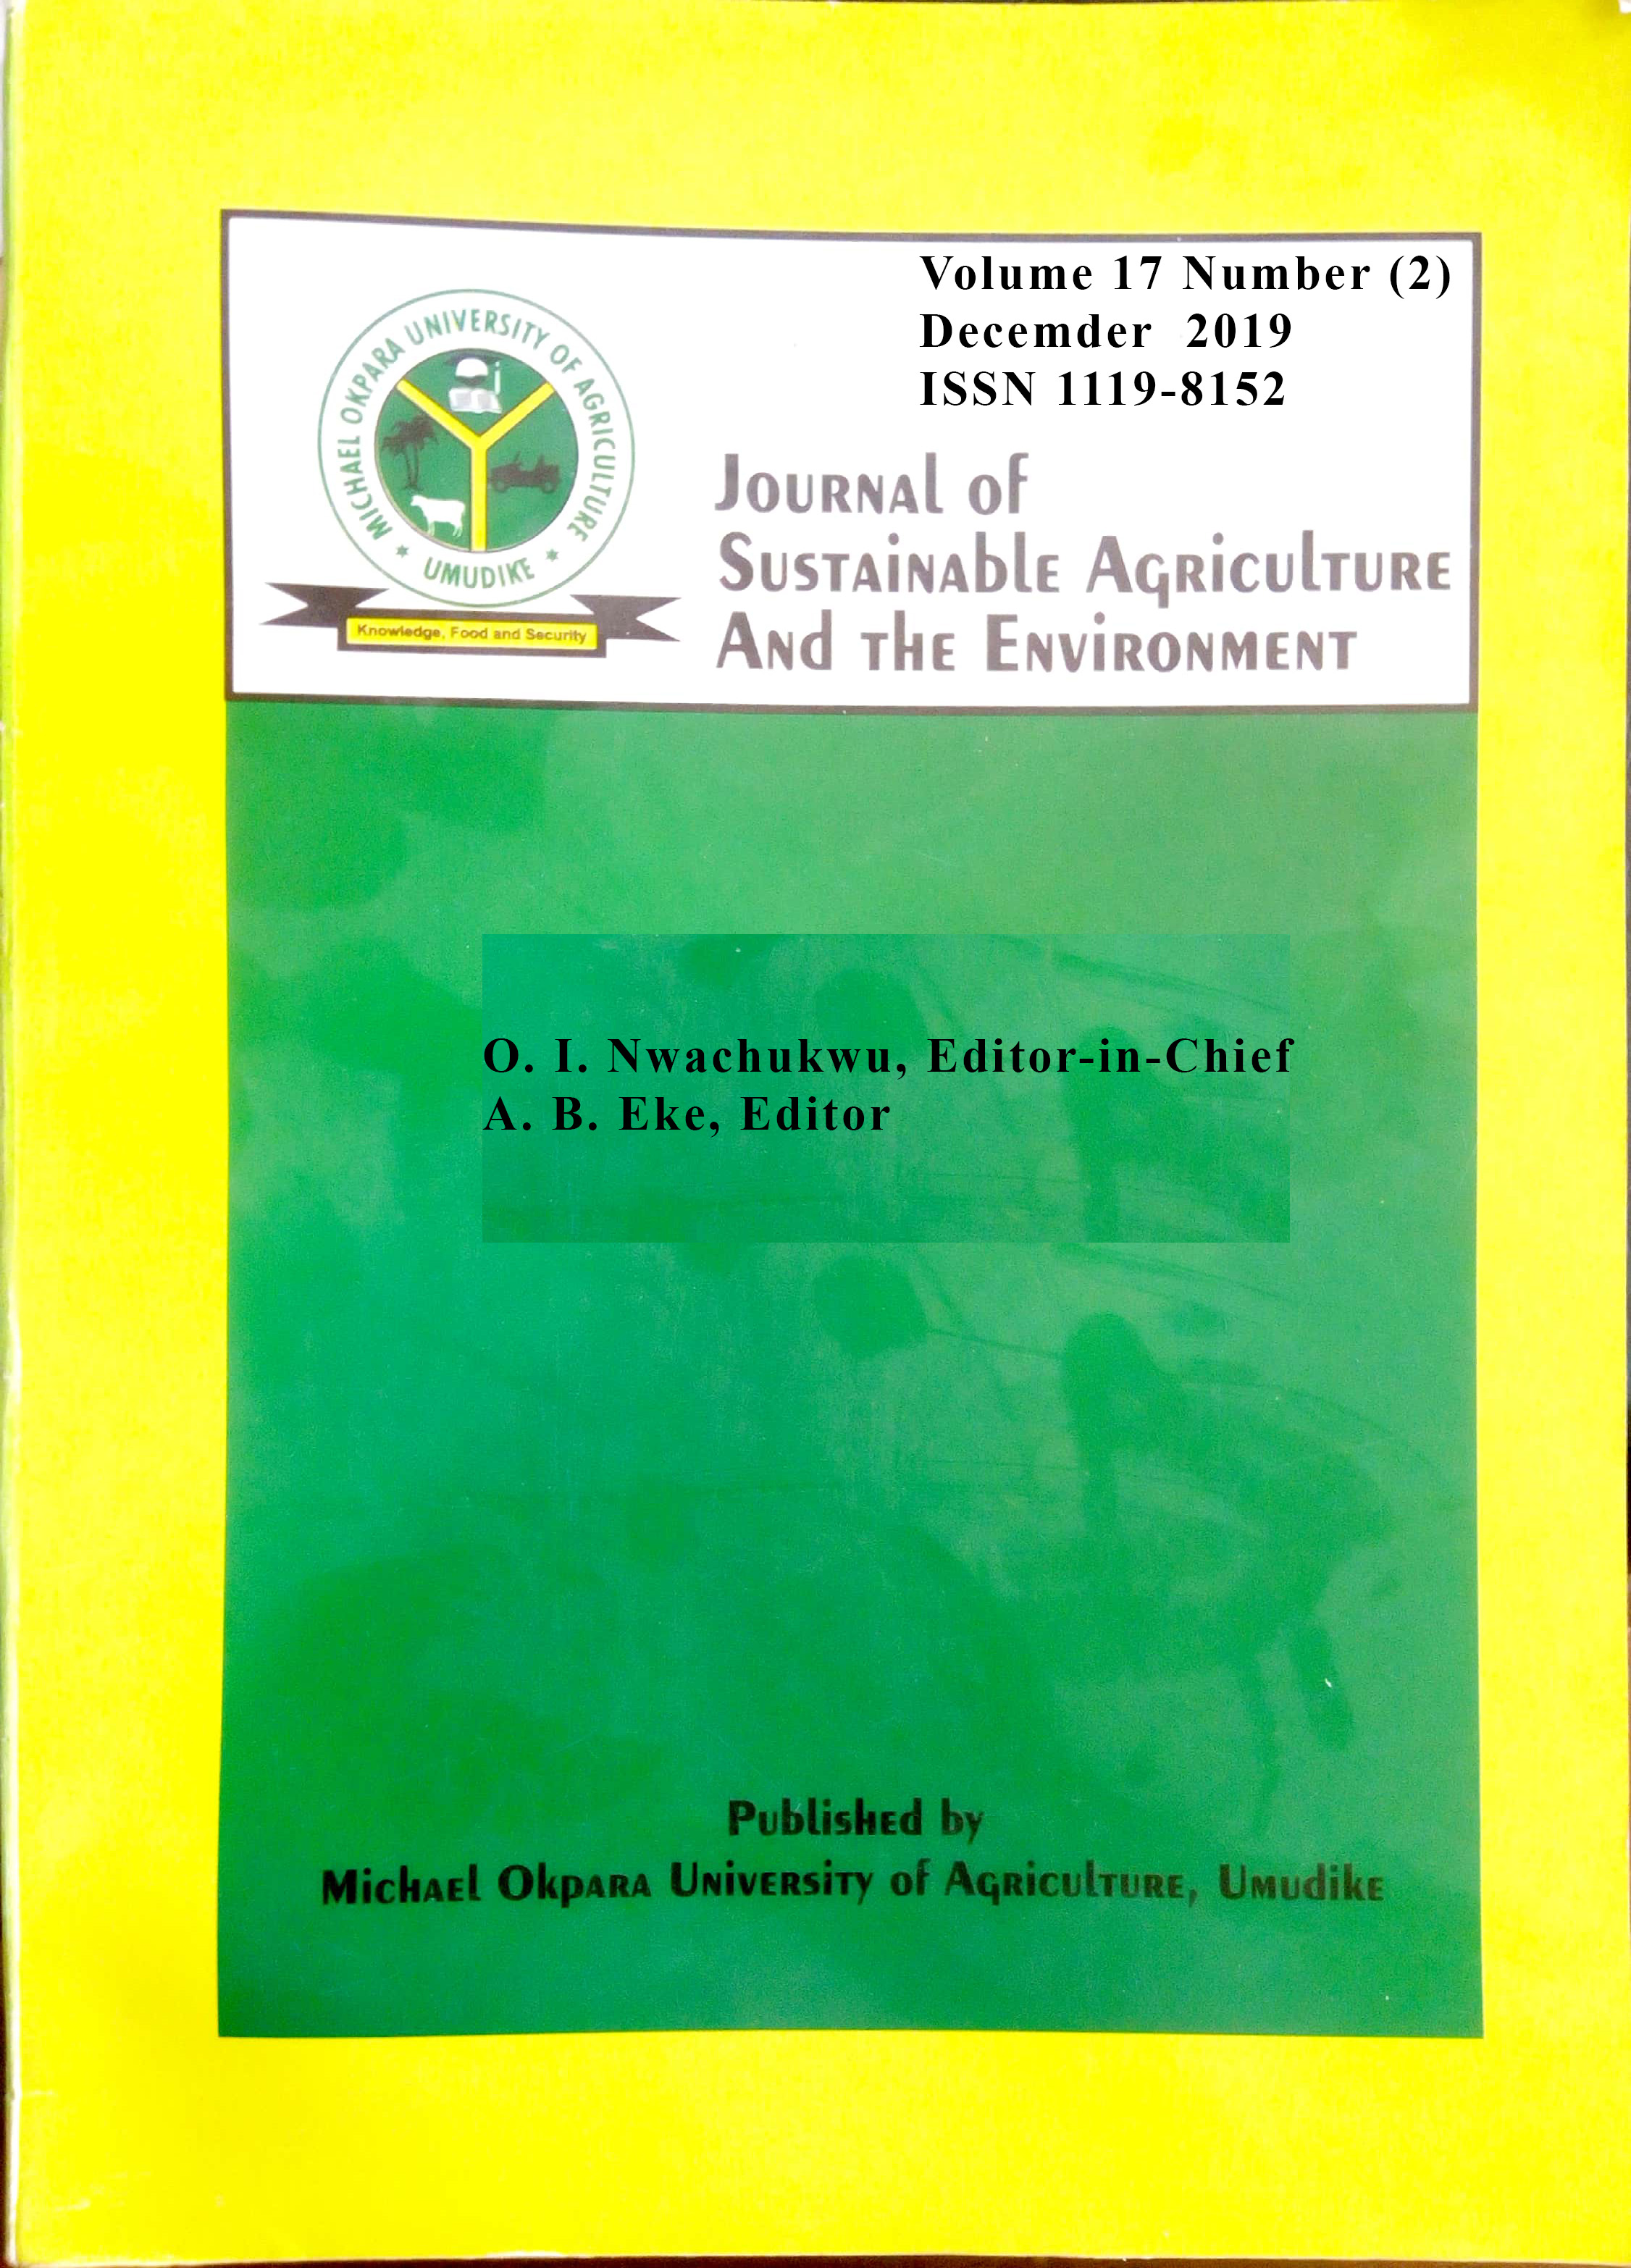 JOURNAL OF SUSTAINABLE AGRICULTURE AND THE ENVIRONMENT